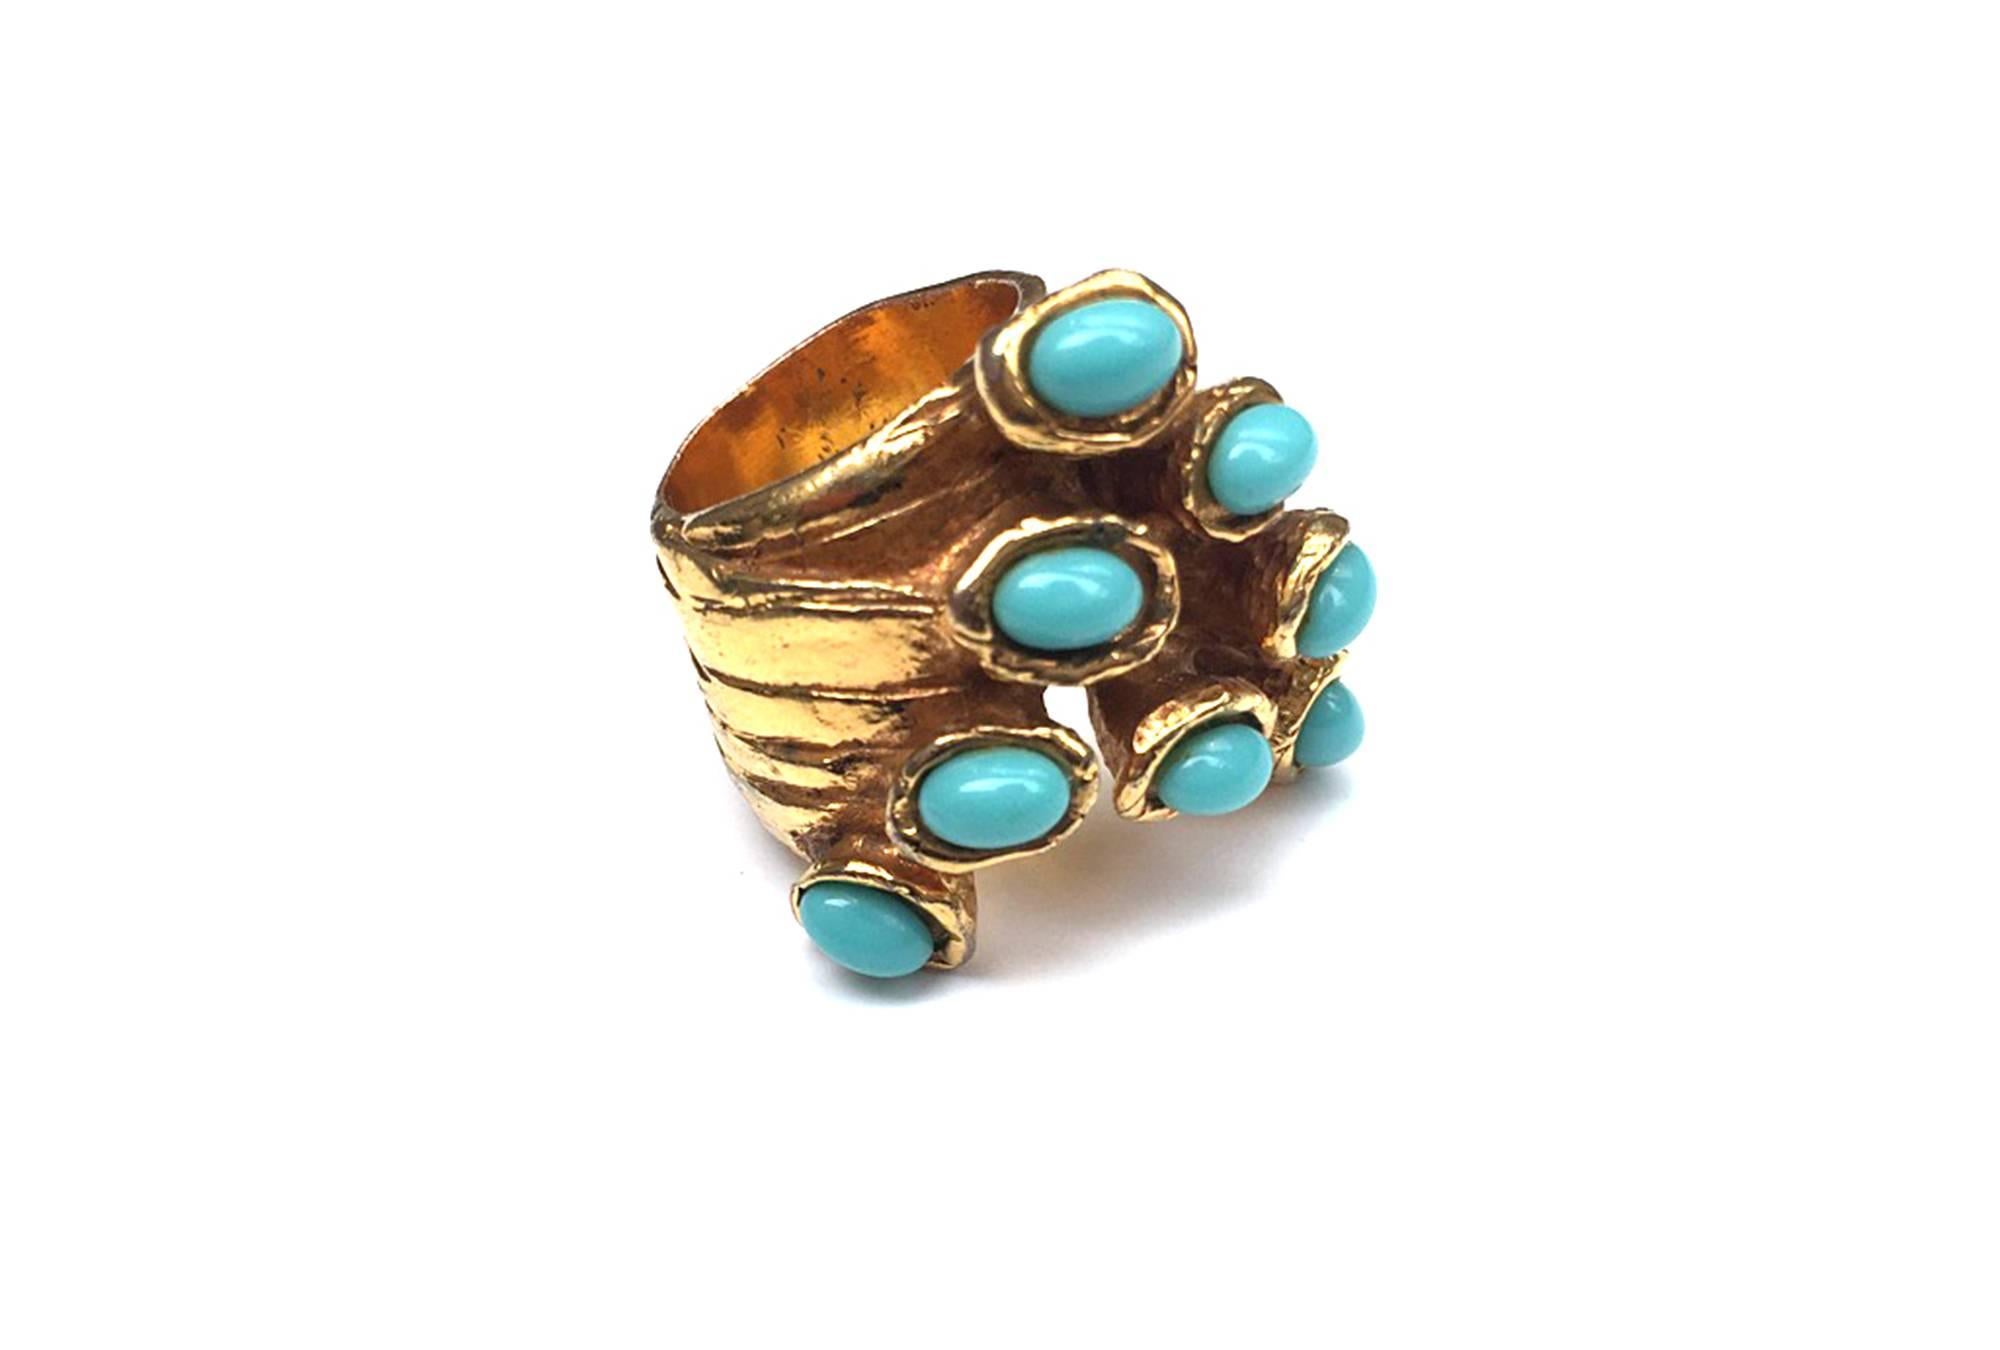 YSL Arty Oval Ring with turquoise Stone & Gold-Toned Finished Metal by Stefano Pilati for YSL. Pilati is trying to show the relevance of the heritage through a contemporary eye.